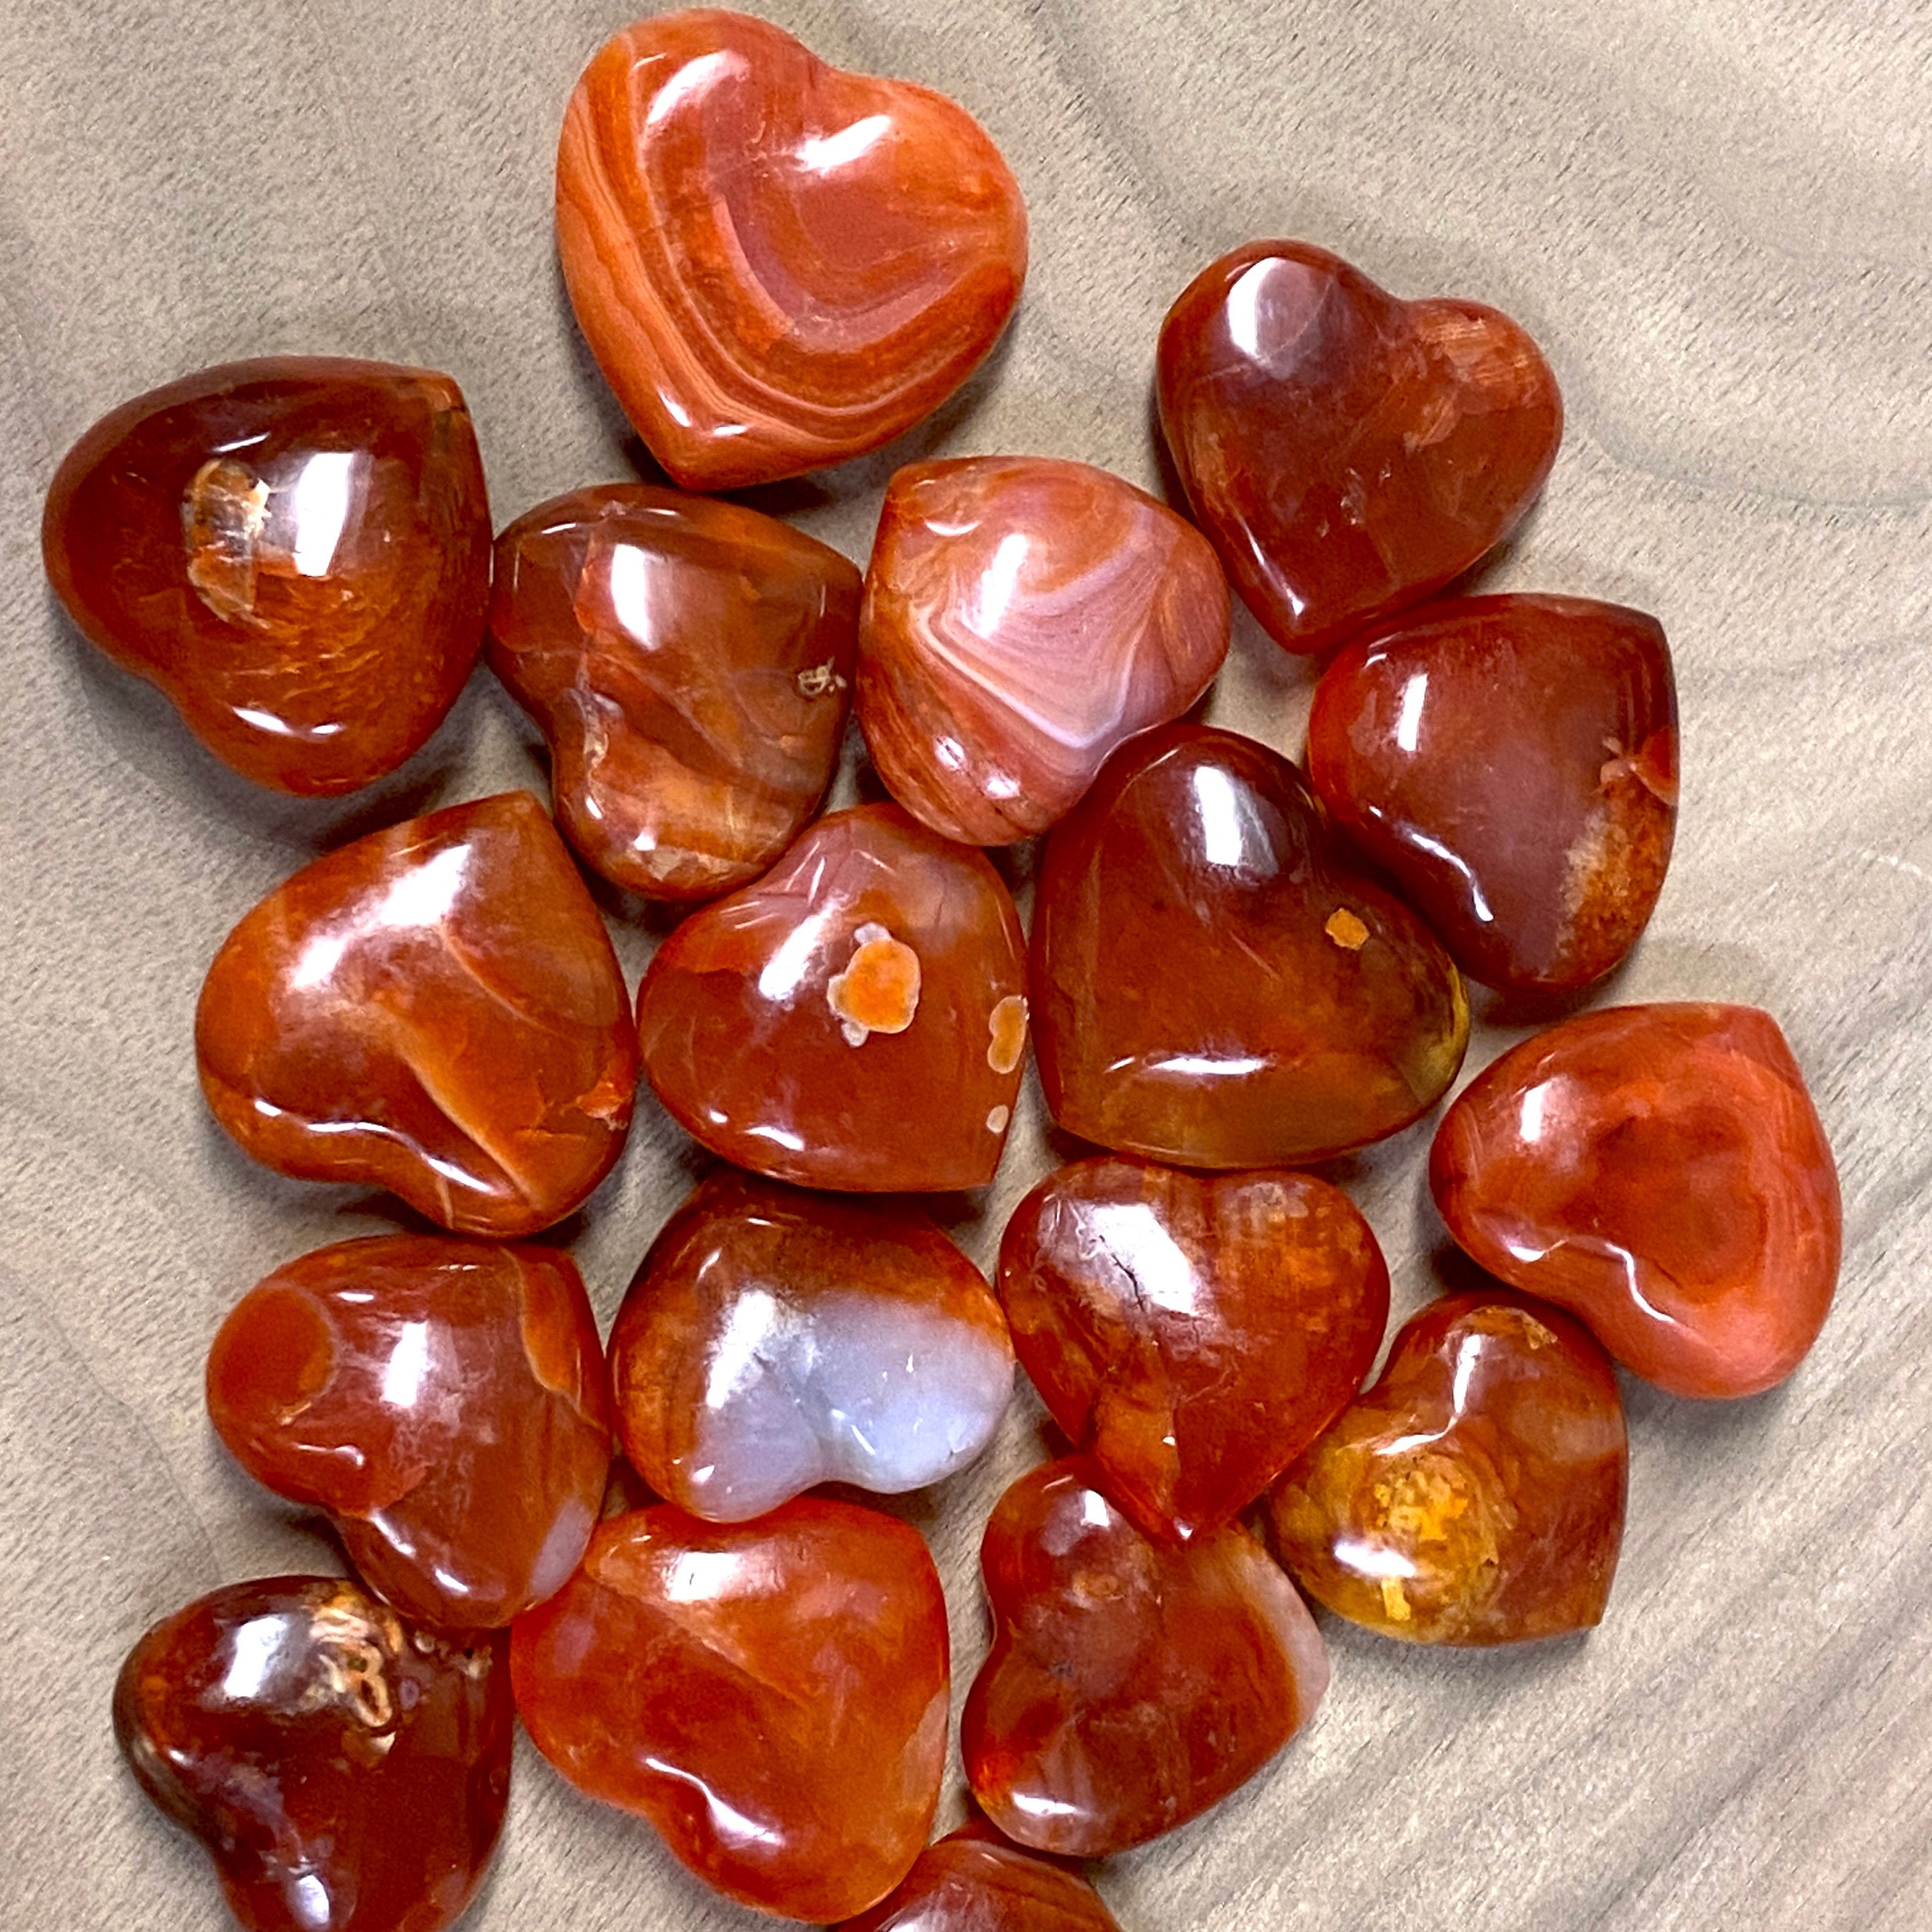 Carnelian HEARTS Madagascar - 2 to 4 Centimeters Carnelian Hearts -  Root Chakra Crystal - Sacral Chakra Stone - Healing Crystals and stones